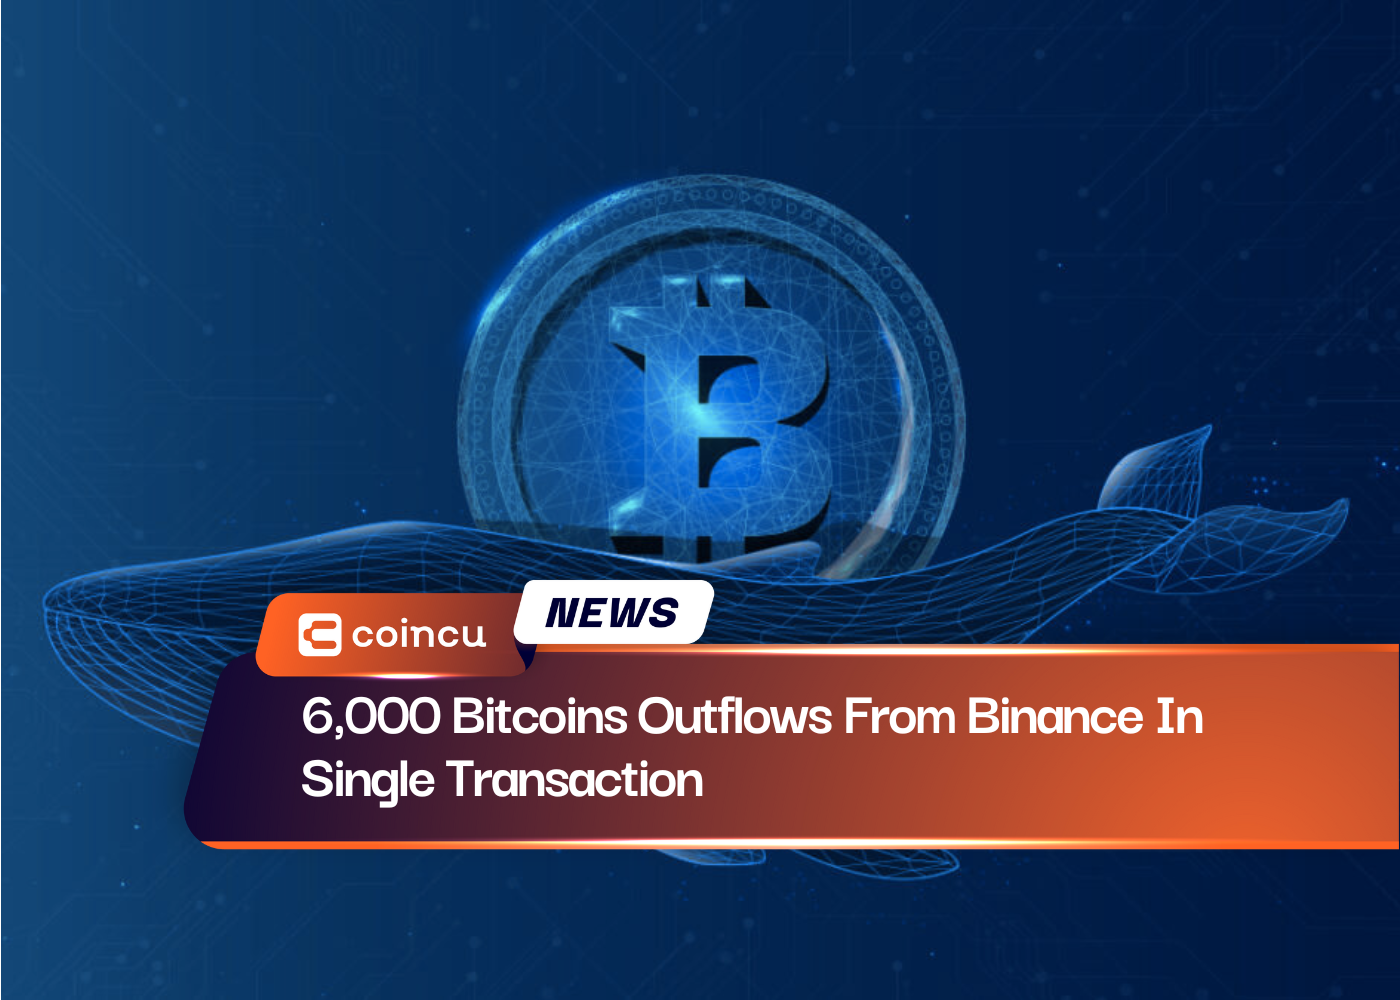 6,000 Bitcoins Outflows From Binance In Single Transaction